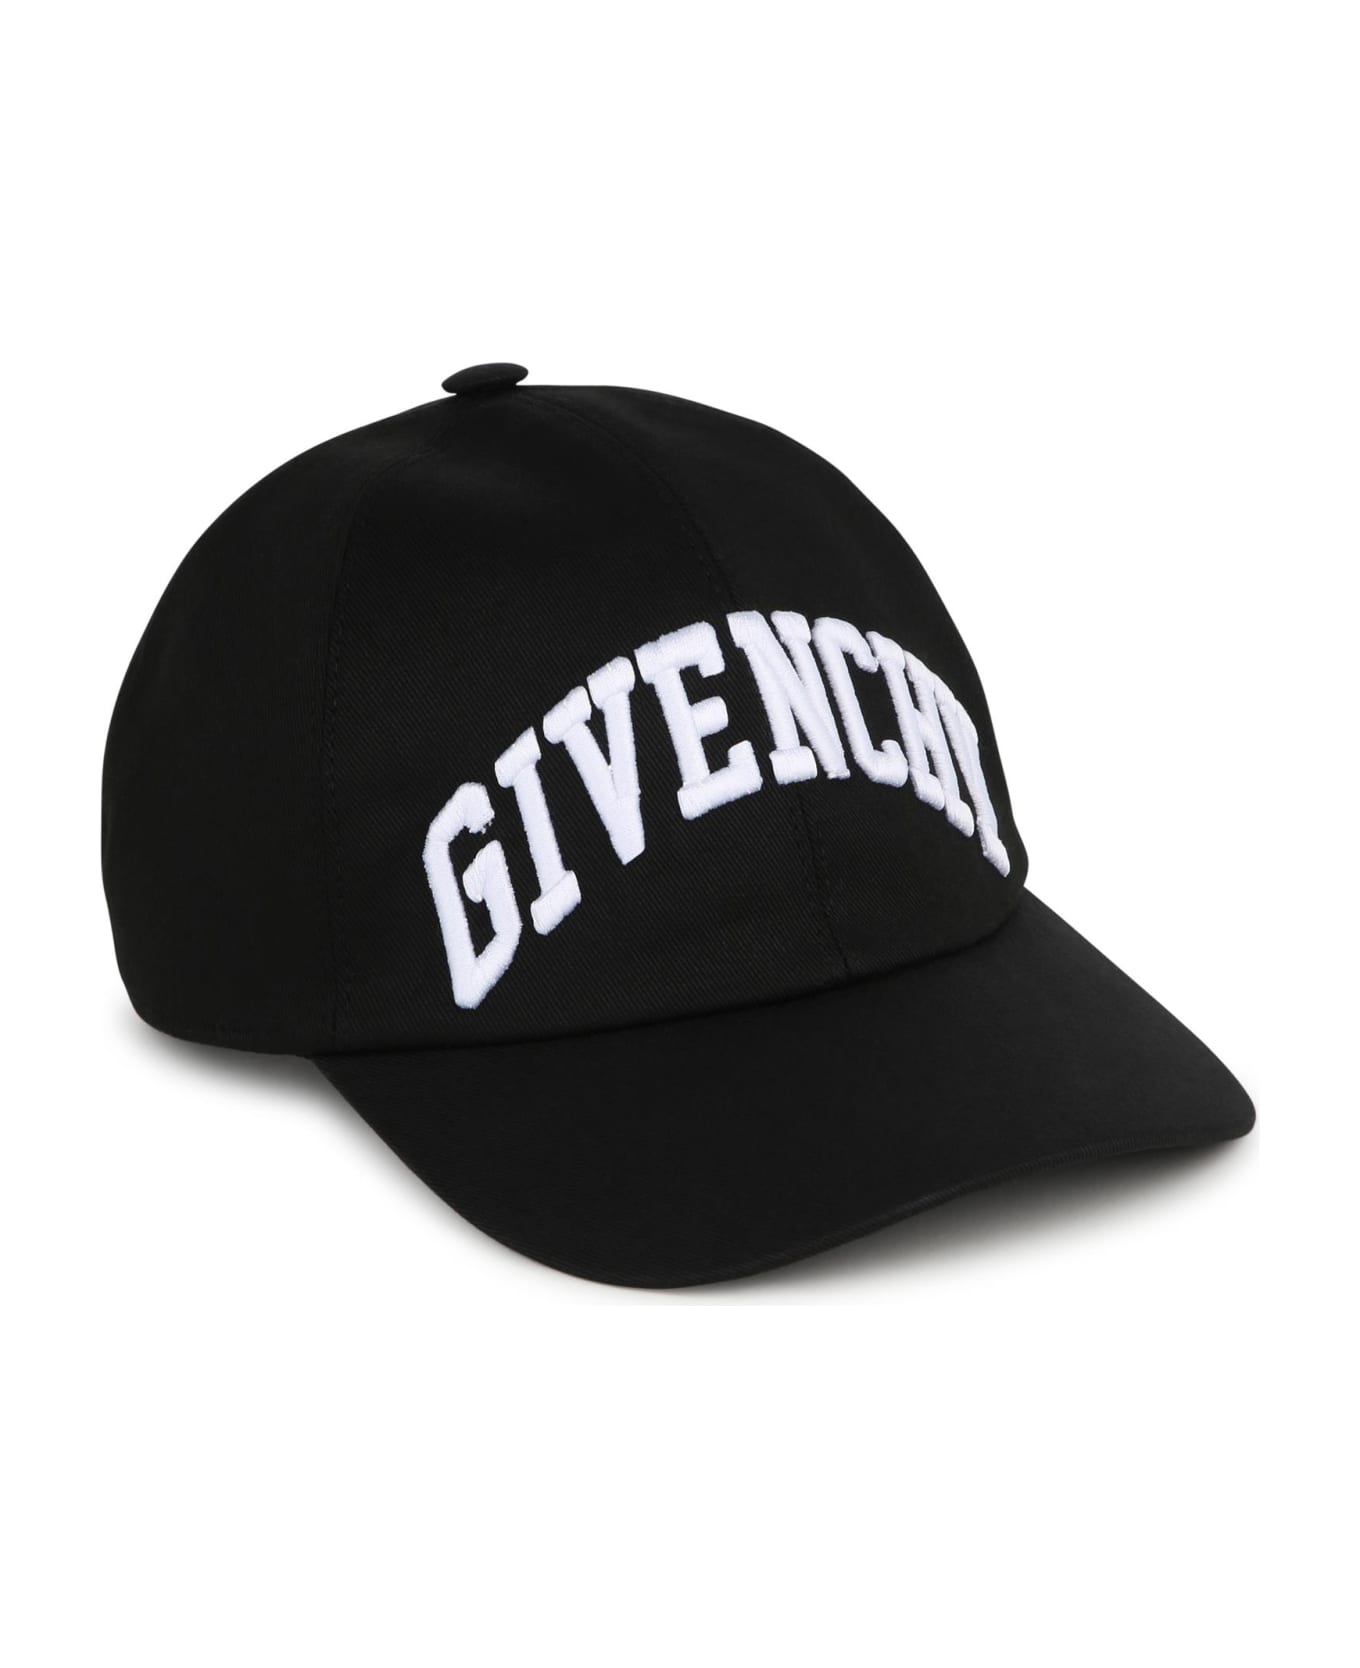 Givenchy Baseball Hat With Embroidery - Black アクセサリー＆ギフト